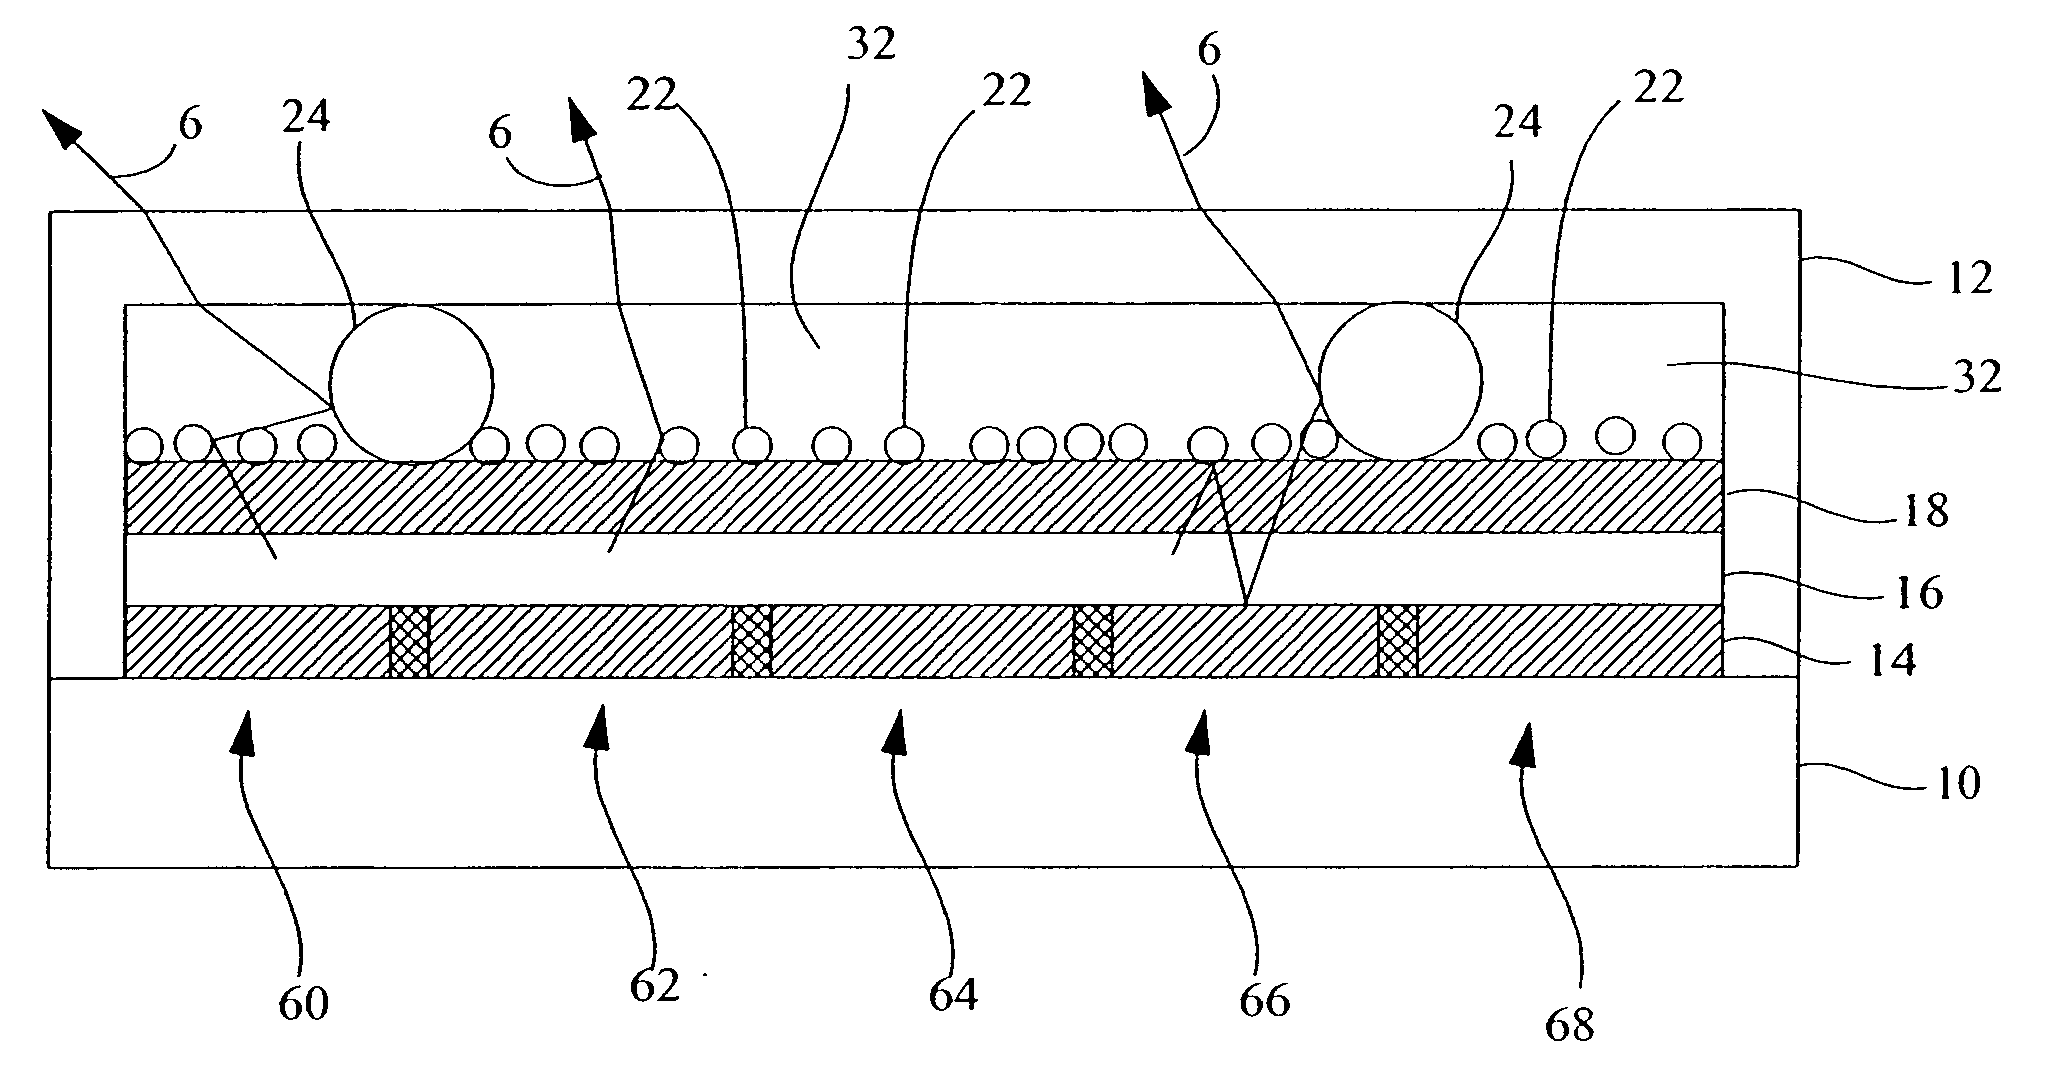 OLED device with improved efficiency and robustness